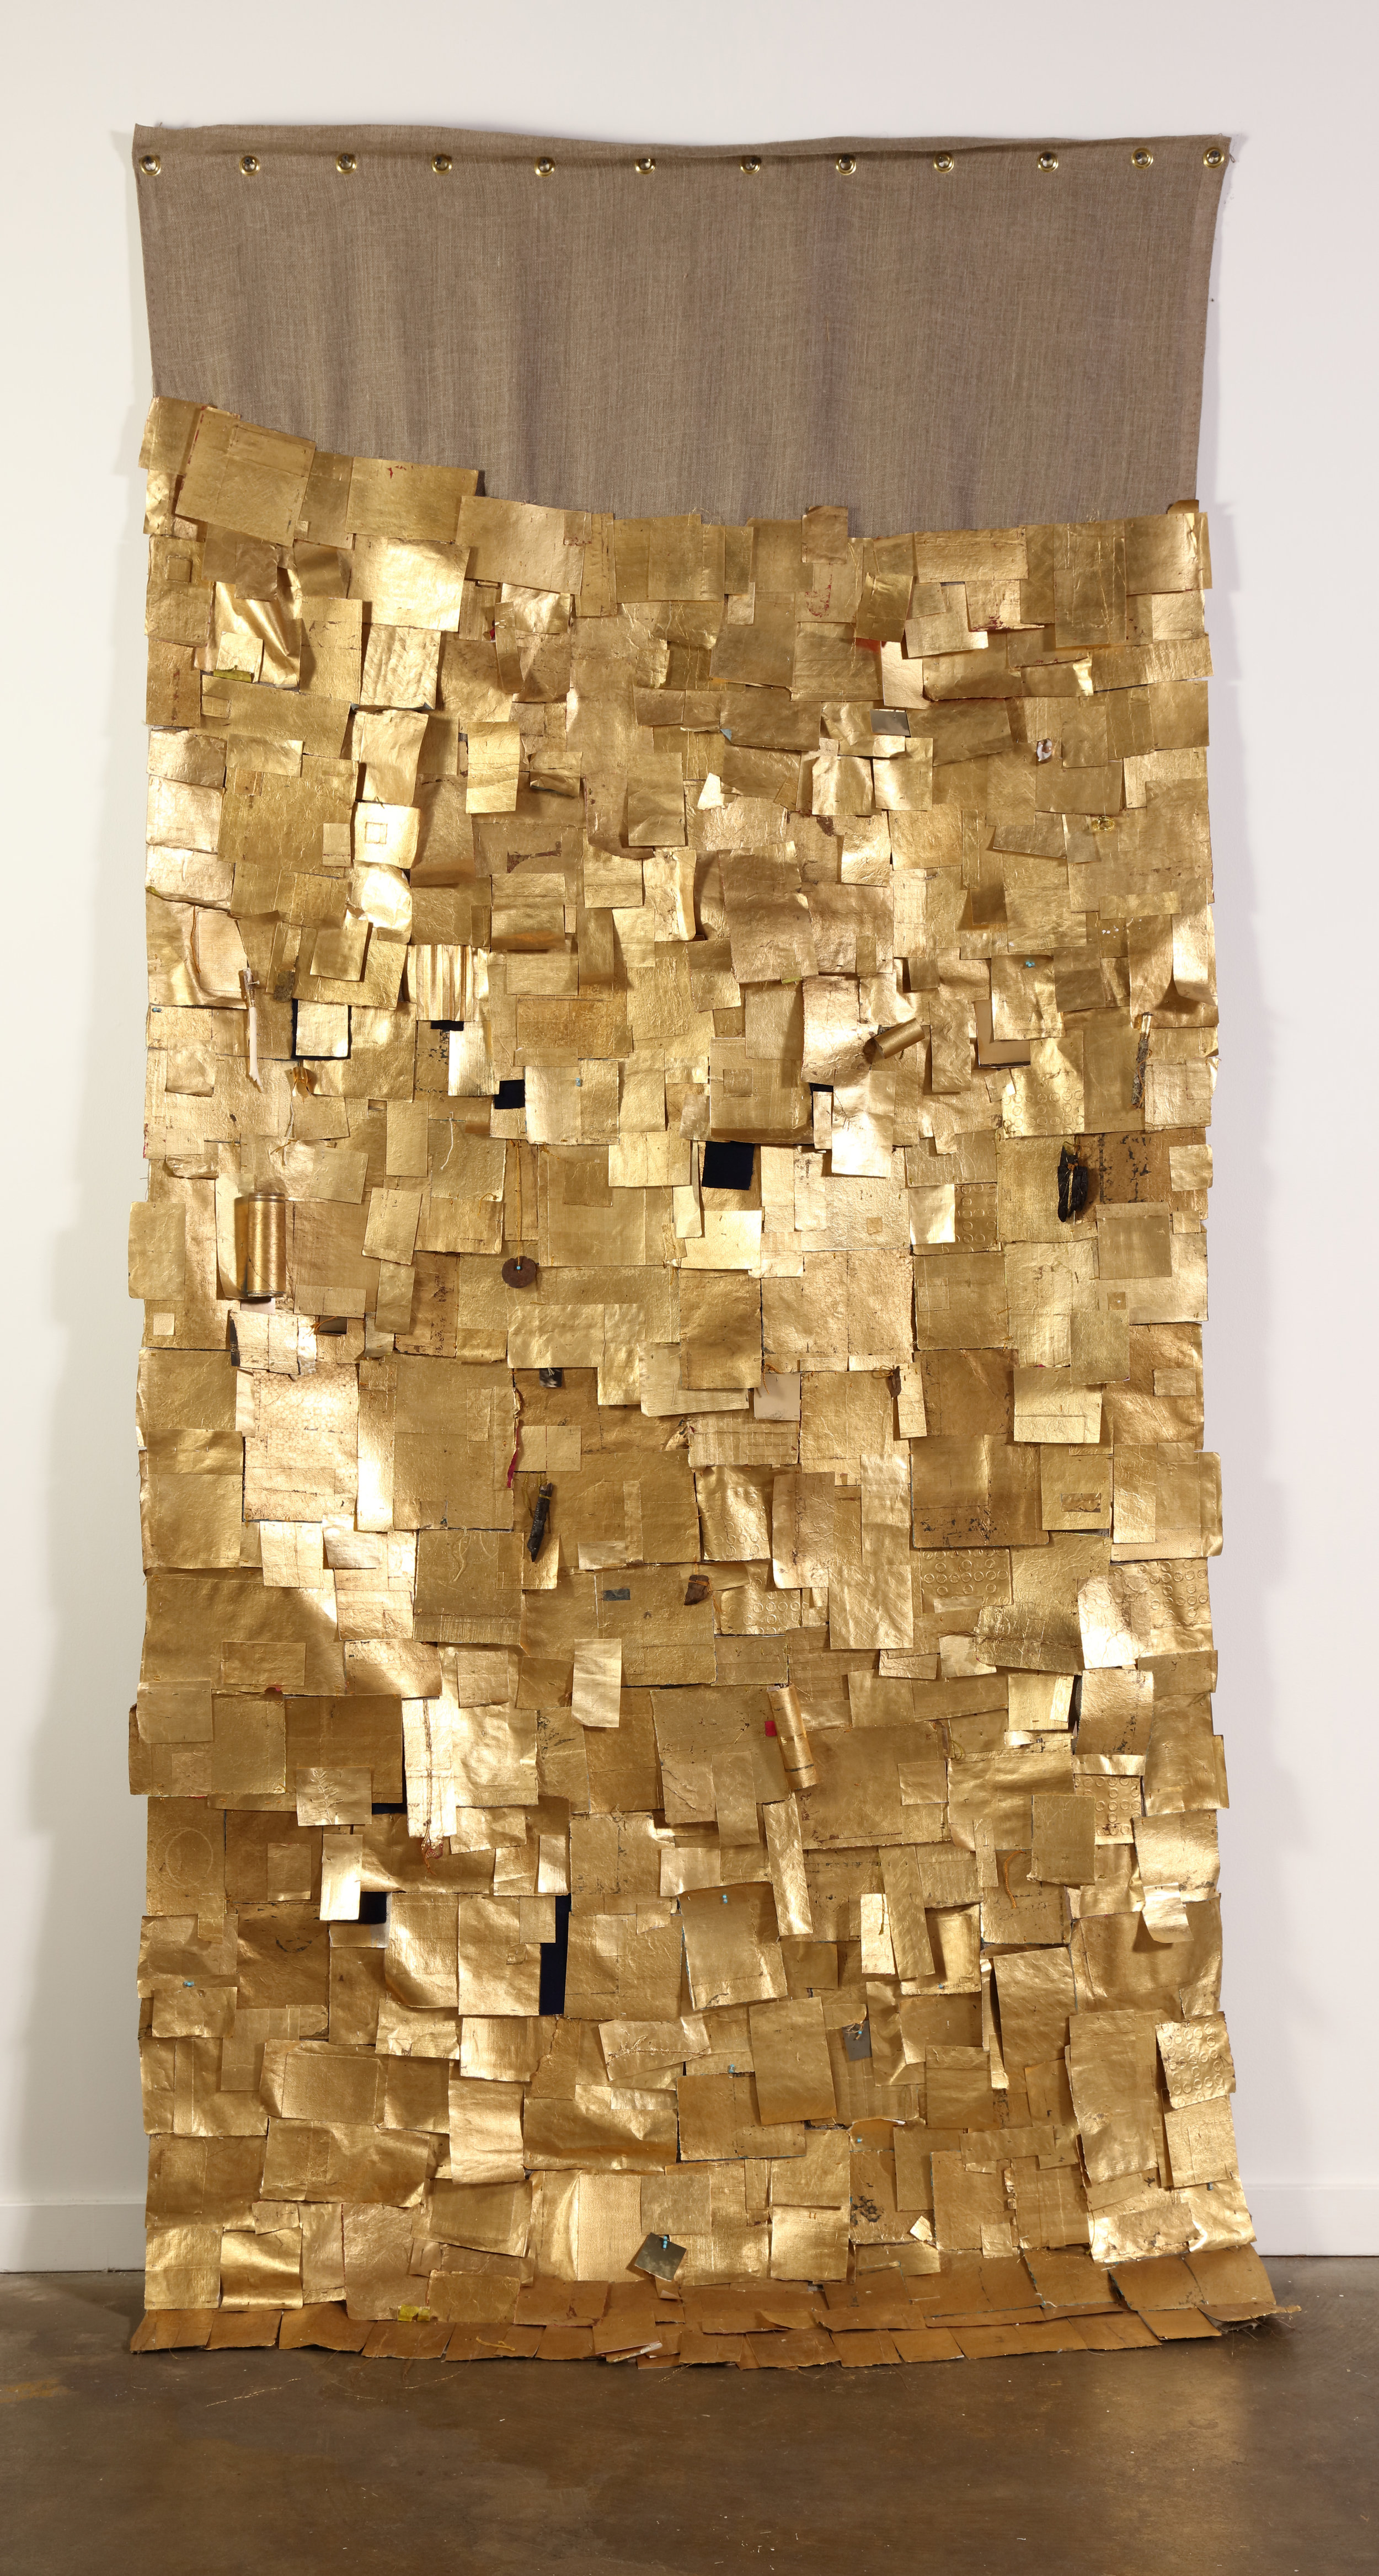   Nothing Gold Can Stay , 2019  Found and personal papers, composition gold leaf, found objects, cotton thread, and 23K gold thread on linen  118 x 56 in. 